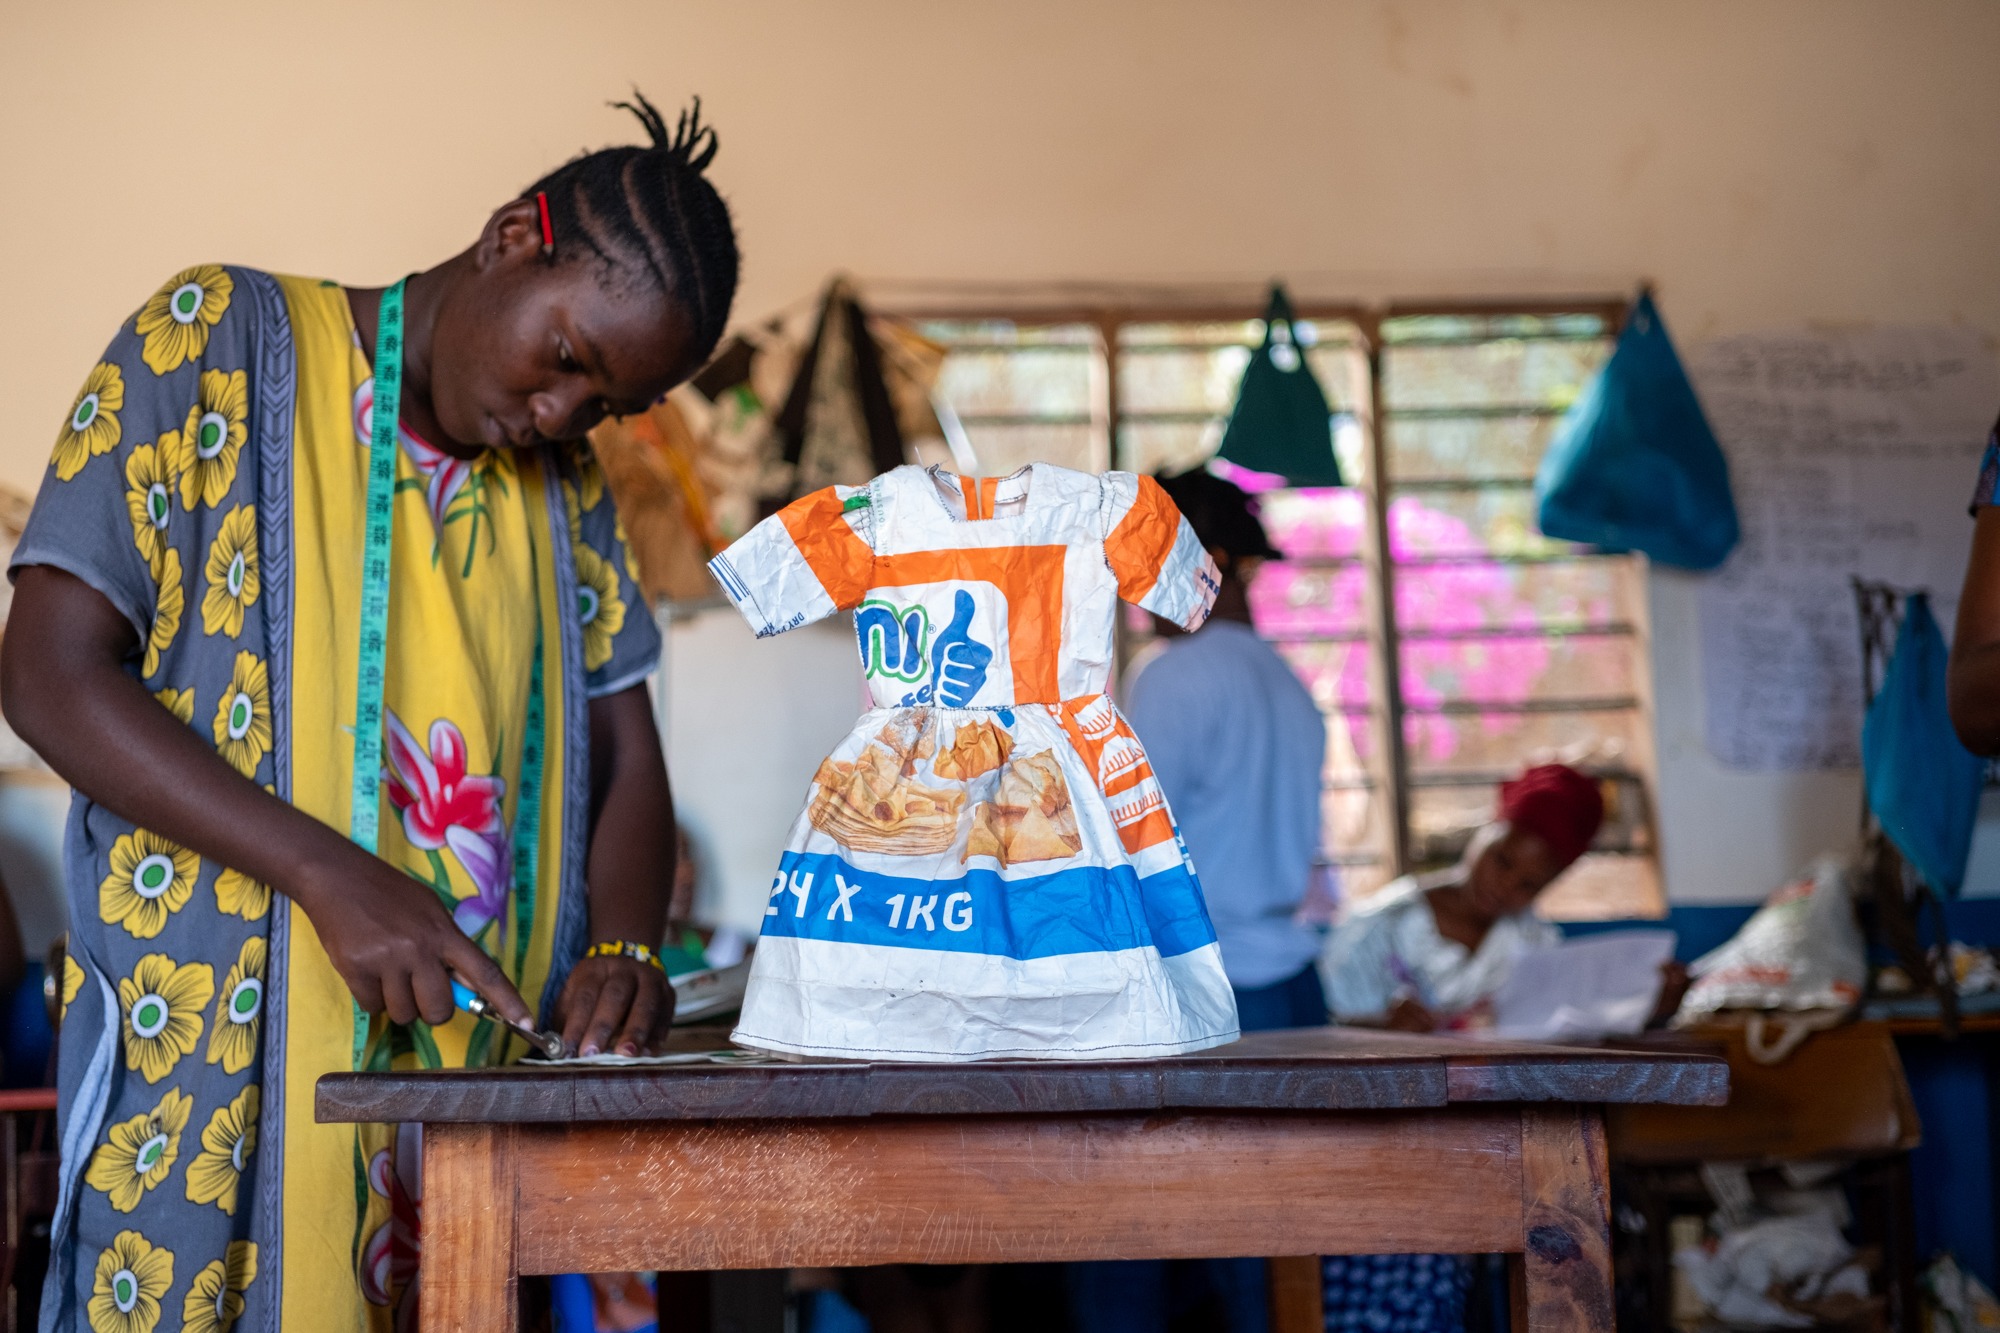 In order to pass their national sewing exam, the girls must know how to effectively read a pattern to create an article of clothing.  The articles of clothing they create are valuable learning tools and made from flour bags in order to save on costs.